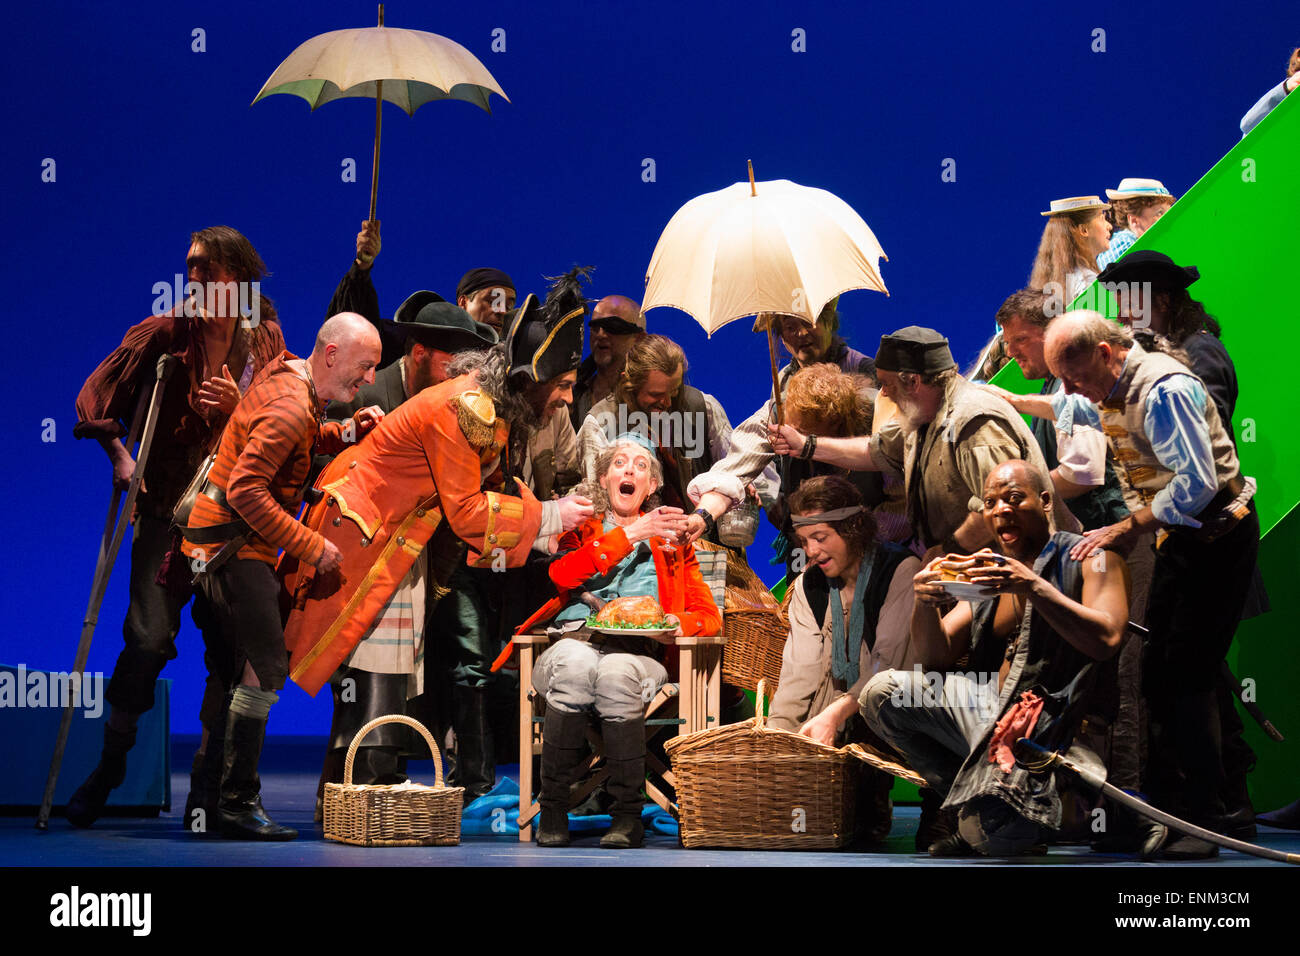 London, UK. 7 May 2015. Dress rehearsal of the Gilbert and Sullivan comic opera 'The Pirates of Penzance' at the London Coliseum. Award winning director Mike Leigh makes his operatic directing debut with The Pirates of Penzance. The ENO production opens at the London Coliseum on 9 May 2015 and runs for 14 productions until 27 June 2015. The English National Opera production is conducted by David Parry. Cast: Andrew Shore as Major-General Stanley, Joshua Bloom as The Pirate King, Alexander Robin Baker as Samuel, Robert Murray as Frederic, the Pirate Apprentice, Jonathan Lemalu as Sergeant of th Stock Photo